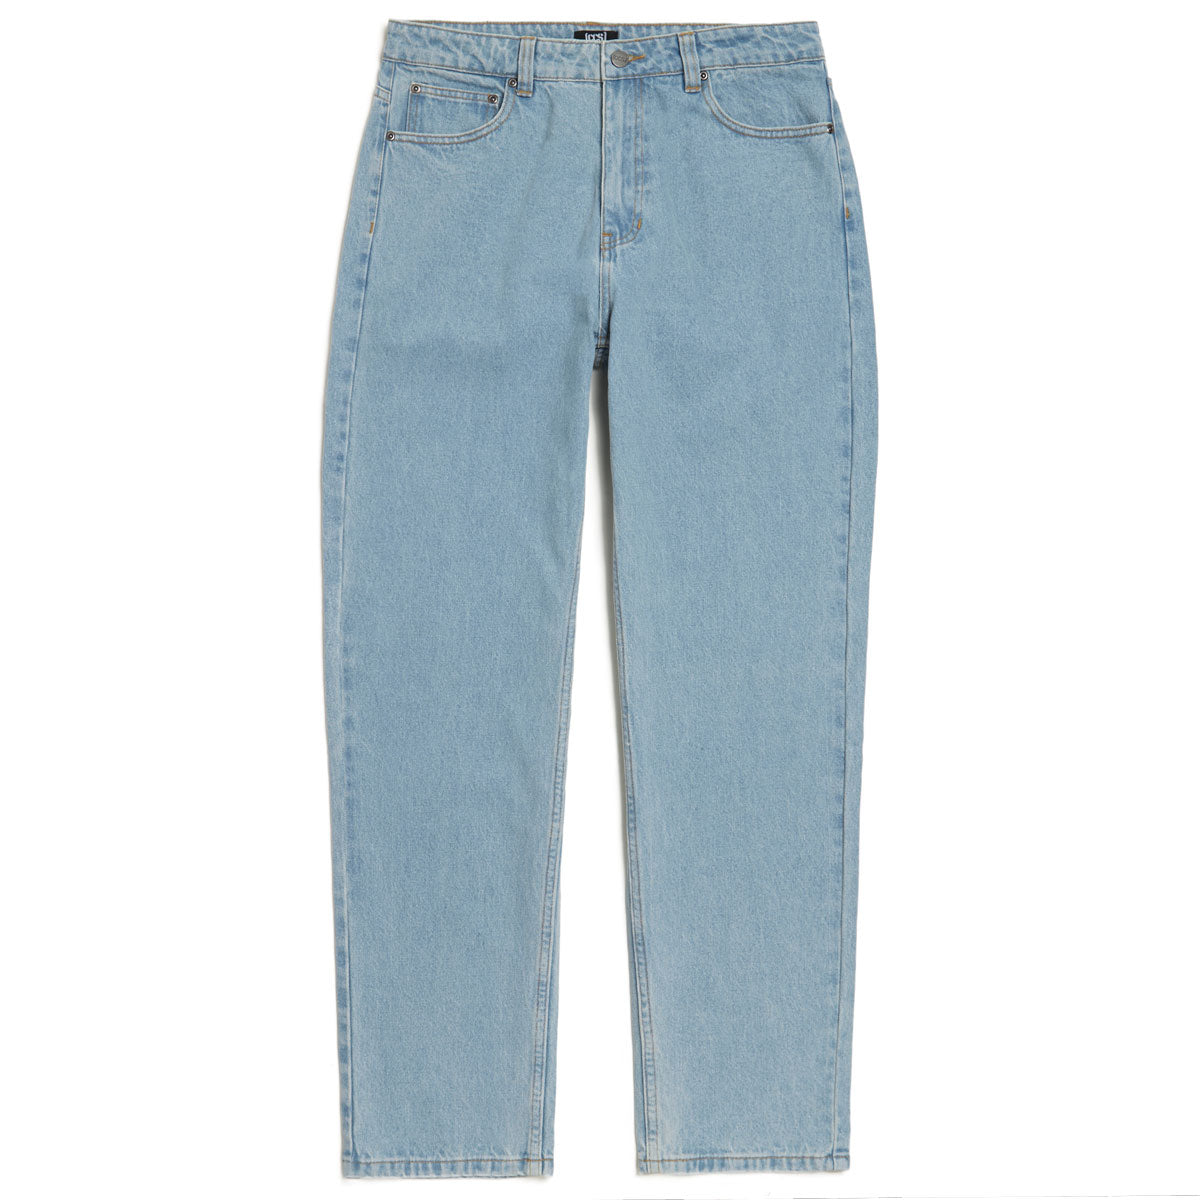 CCS Original Relaxed Taper Jeans - Light Wash image 4